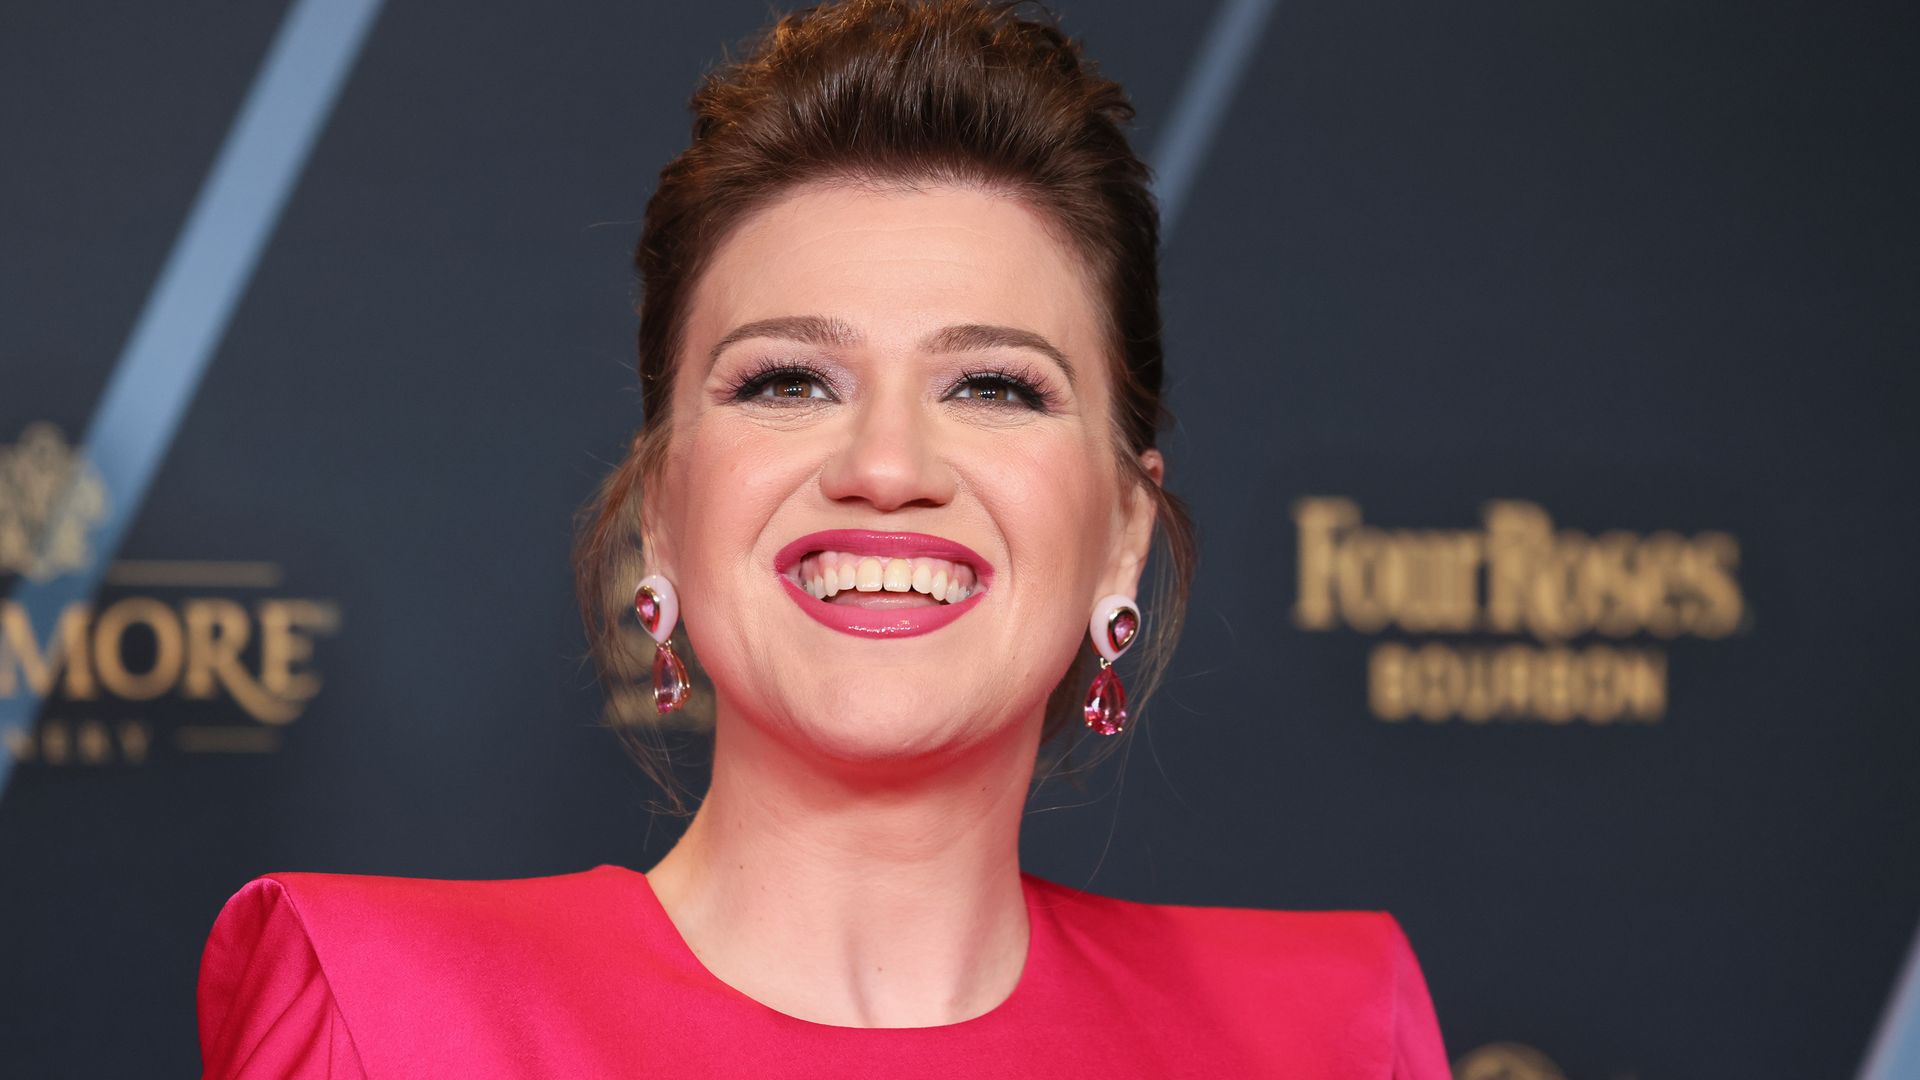 Kelly Clarkson is shining bright in a $400 rainbow-colored mini dress